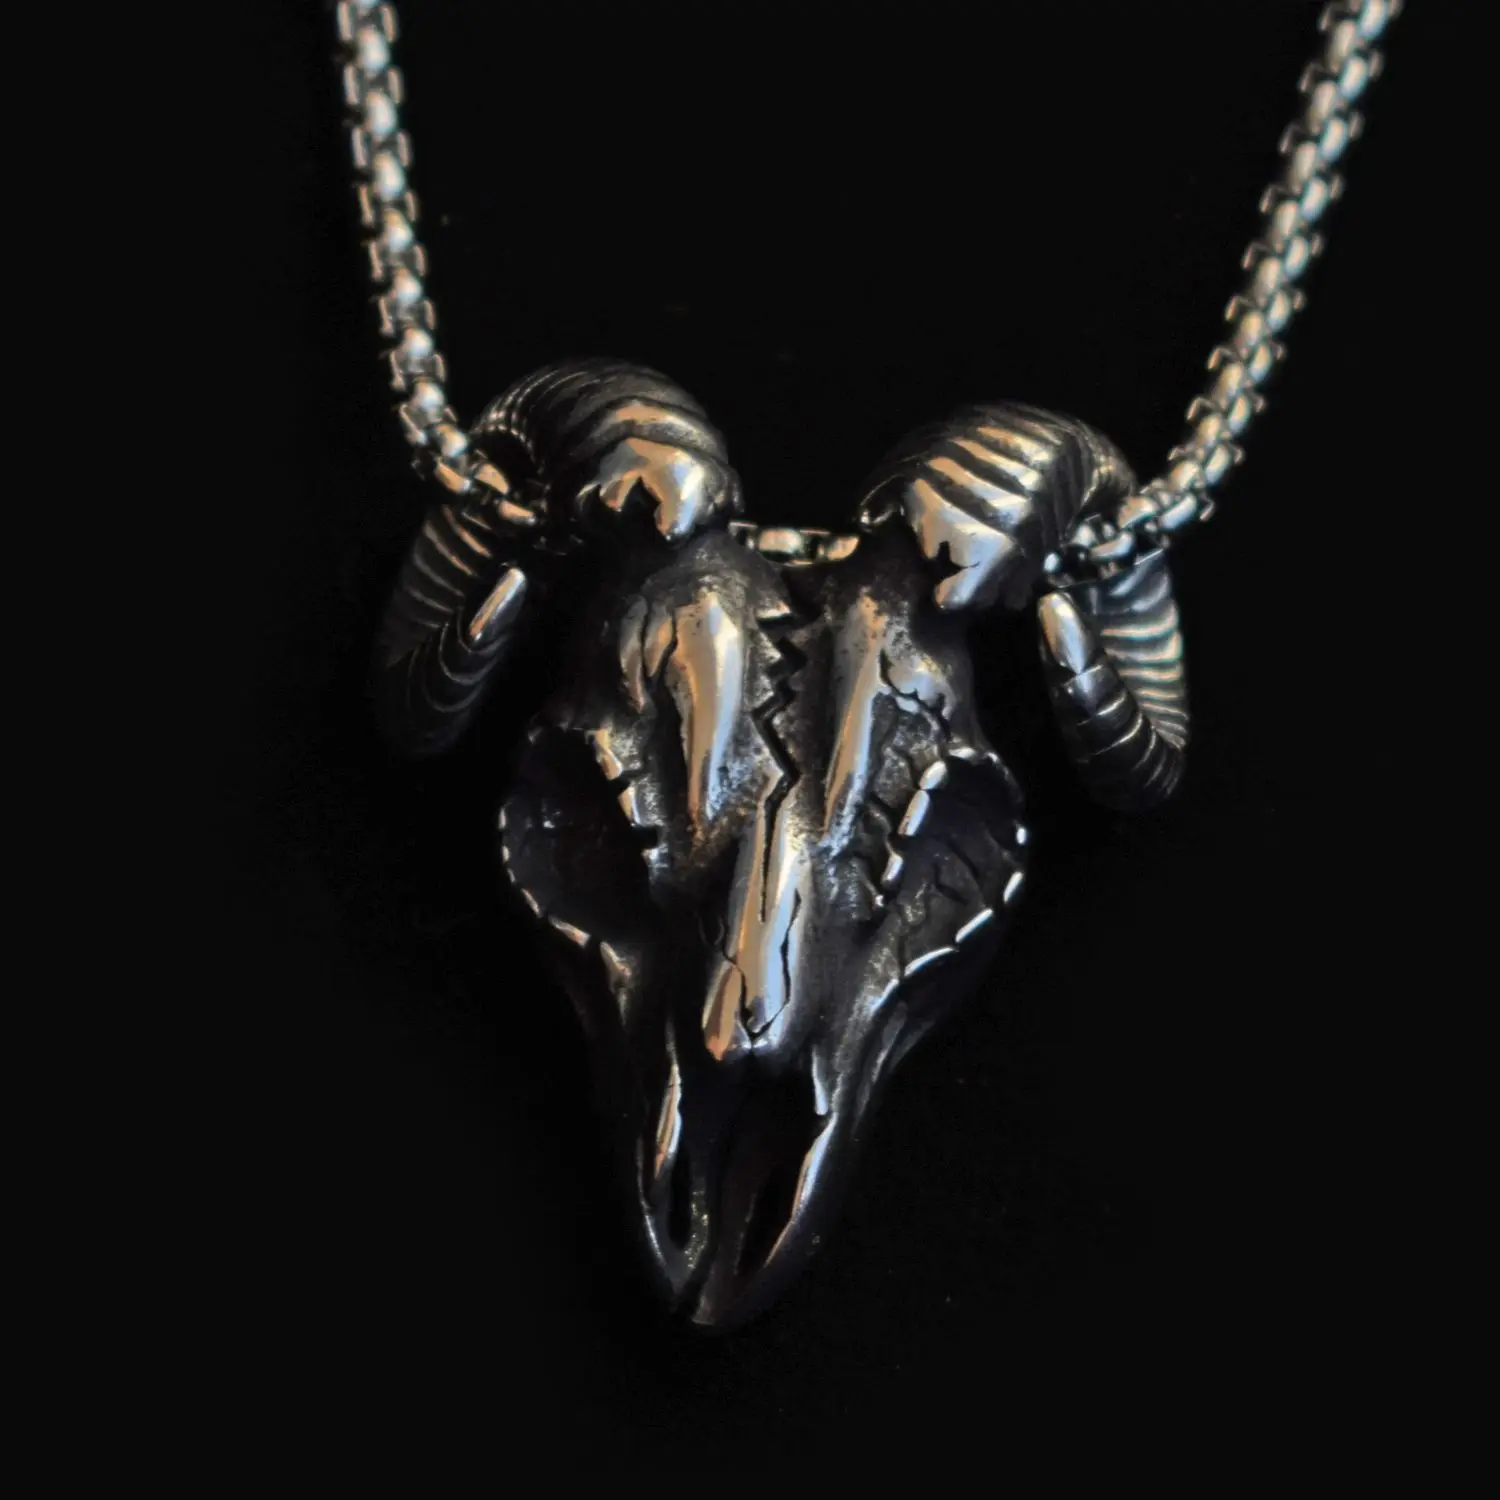 HANXIAODONG Mens 316L Stainless Vintage Oxidized Punk Animal Sheep Head Pendant Gothic Steel Pendant Necklace Silver Black Color : Silver Black, Size : Chain